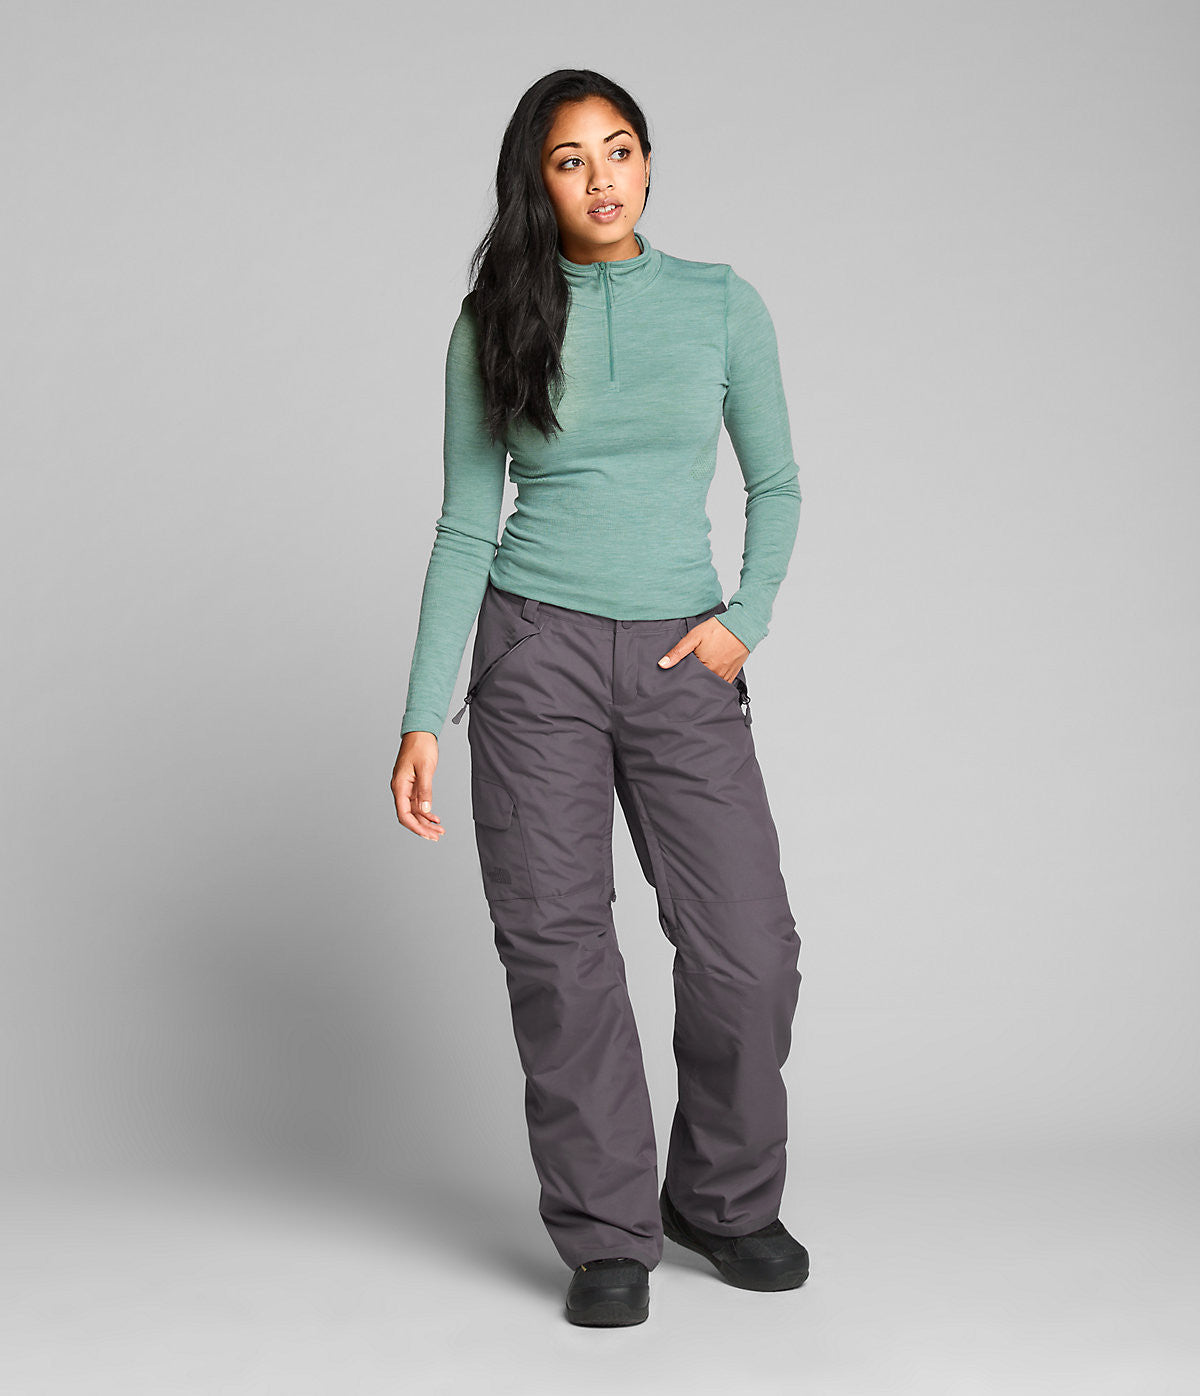 the north face women's freedom lrbc insulated pant